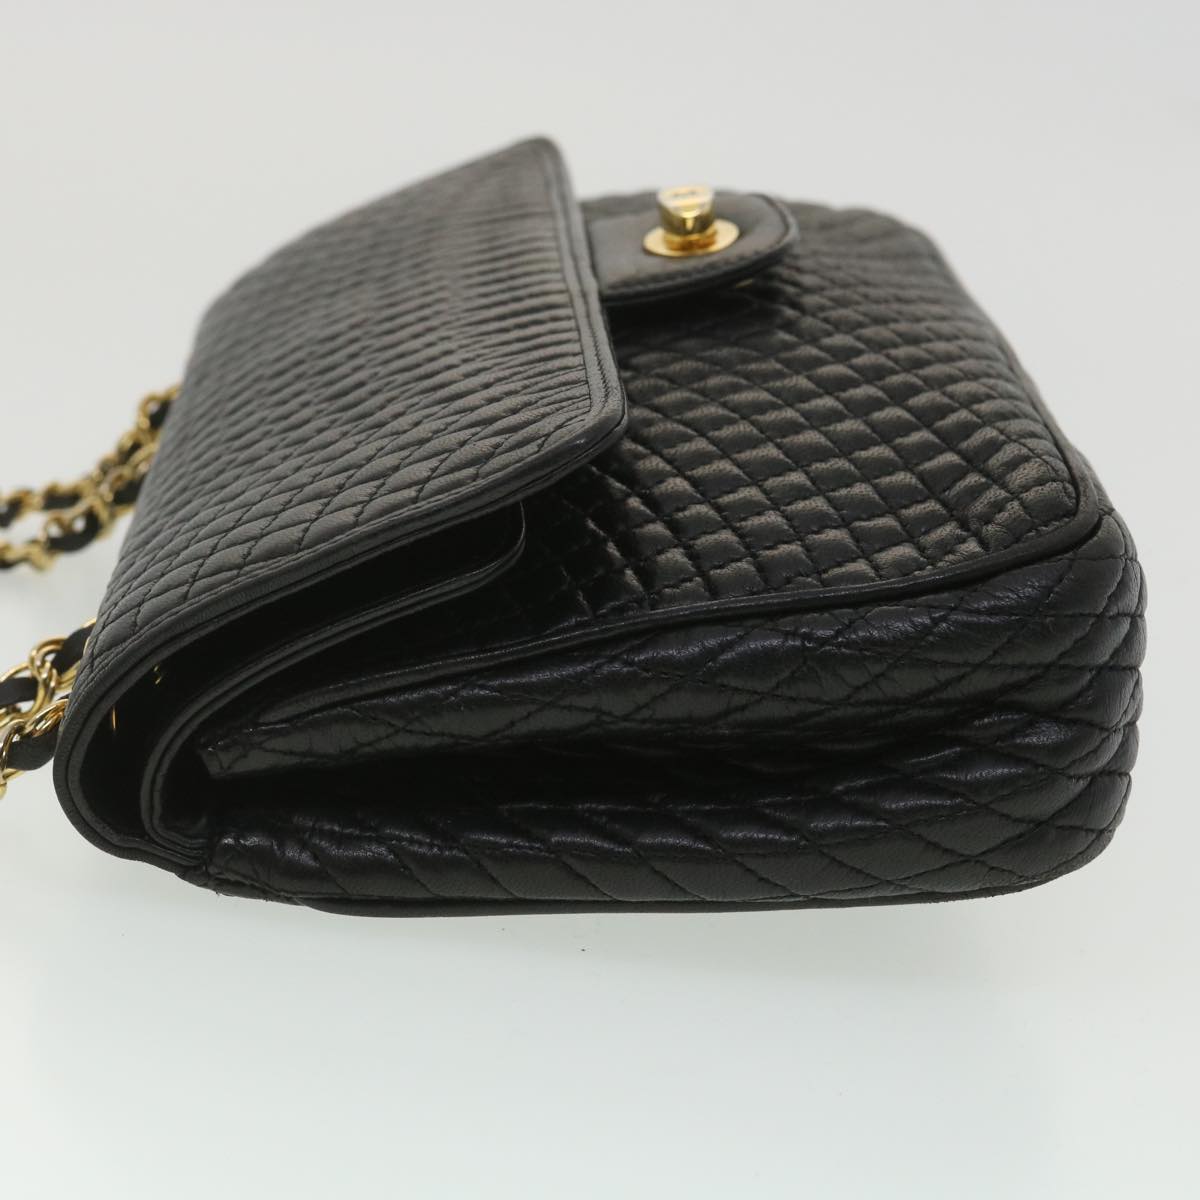 BALLY Quilted Chain Shoulder Bag Leather Black Auth yk5704